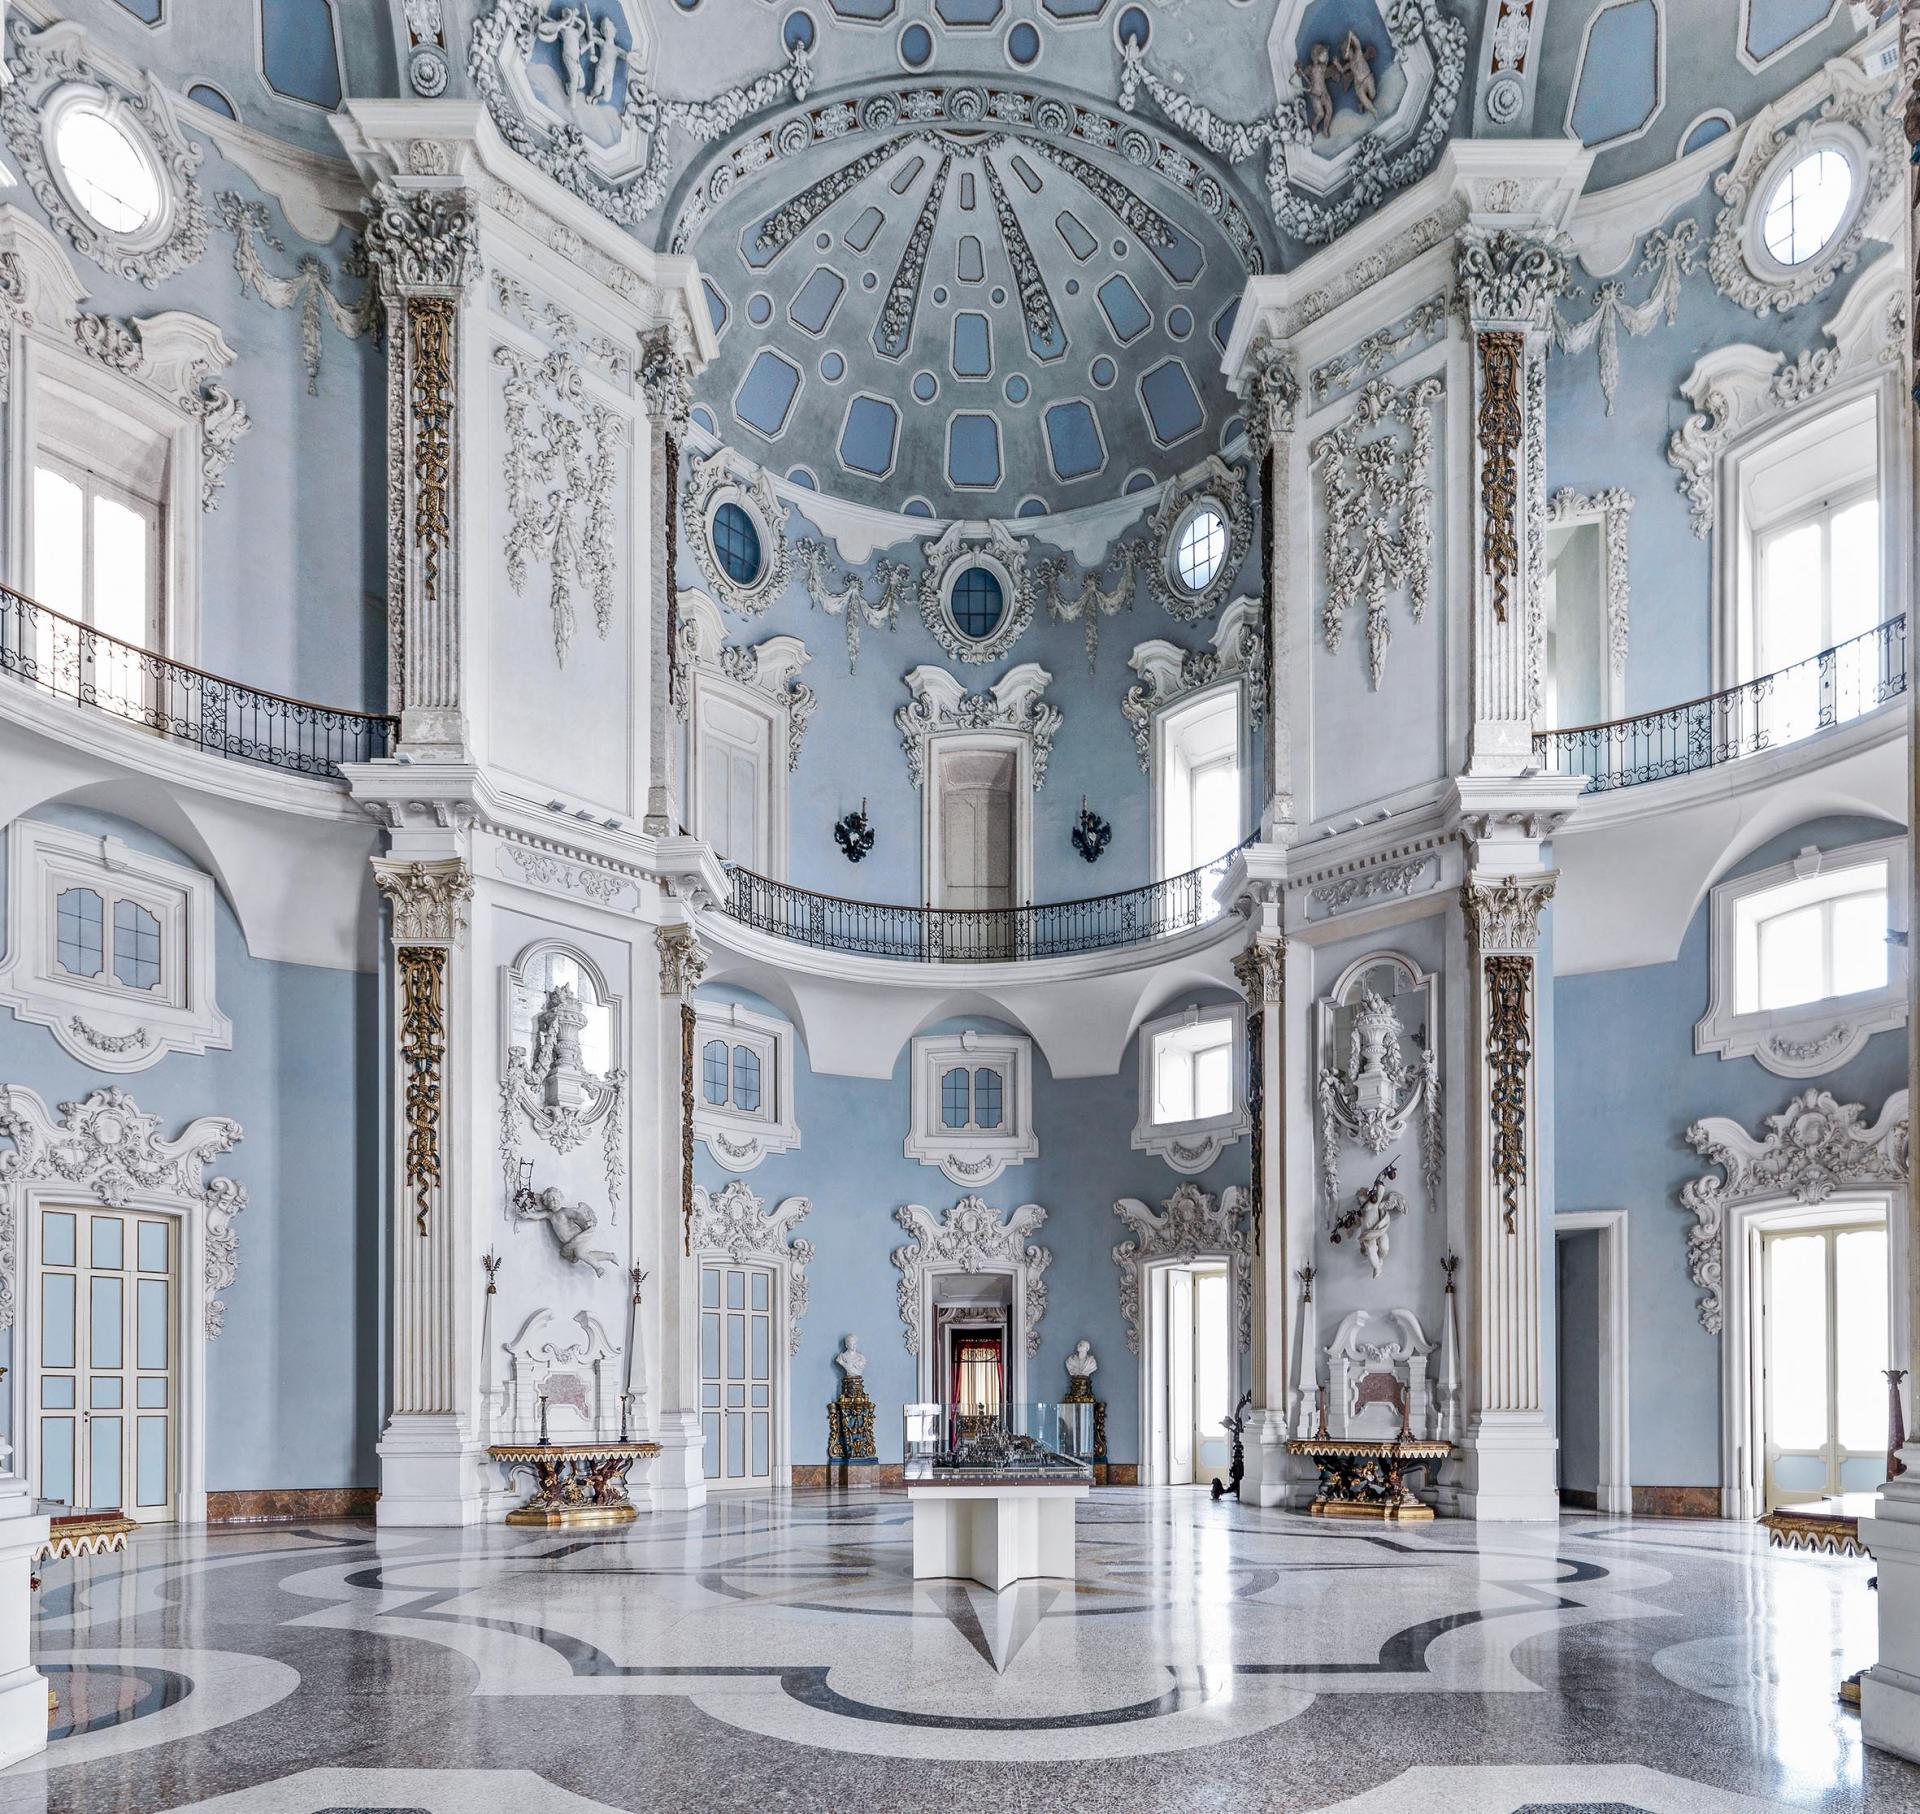 Palazzo Borromeo II, Isola Bella, 2018
C print
Signed and numbered on the verso label

The photographer is based in Florence, and is fascinated how his architectural subject matter allows him to control the composition of his image.  For many years